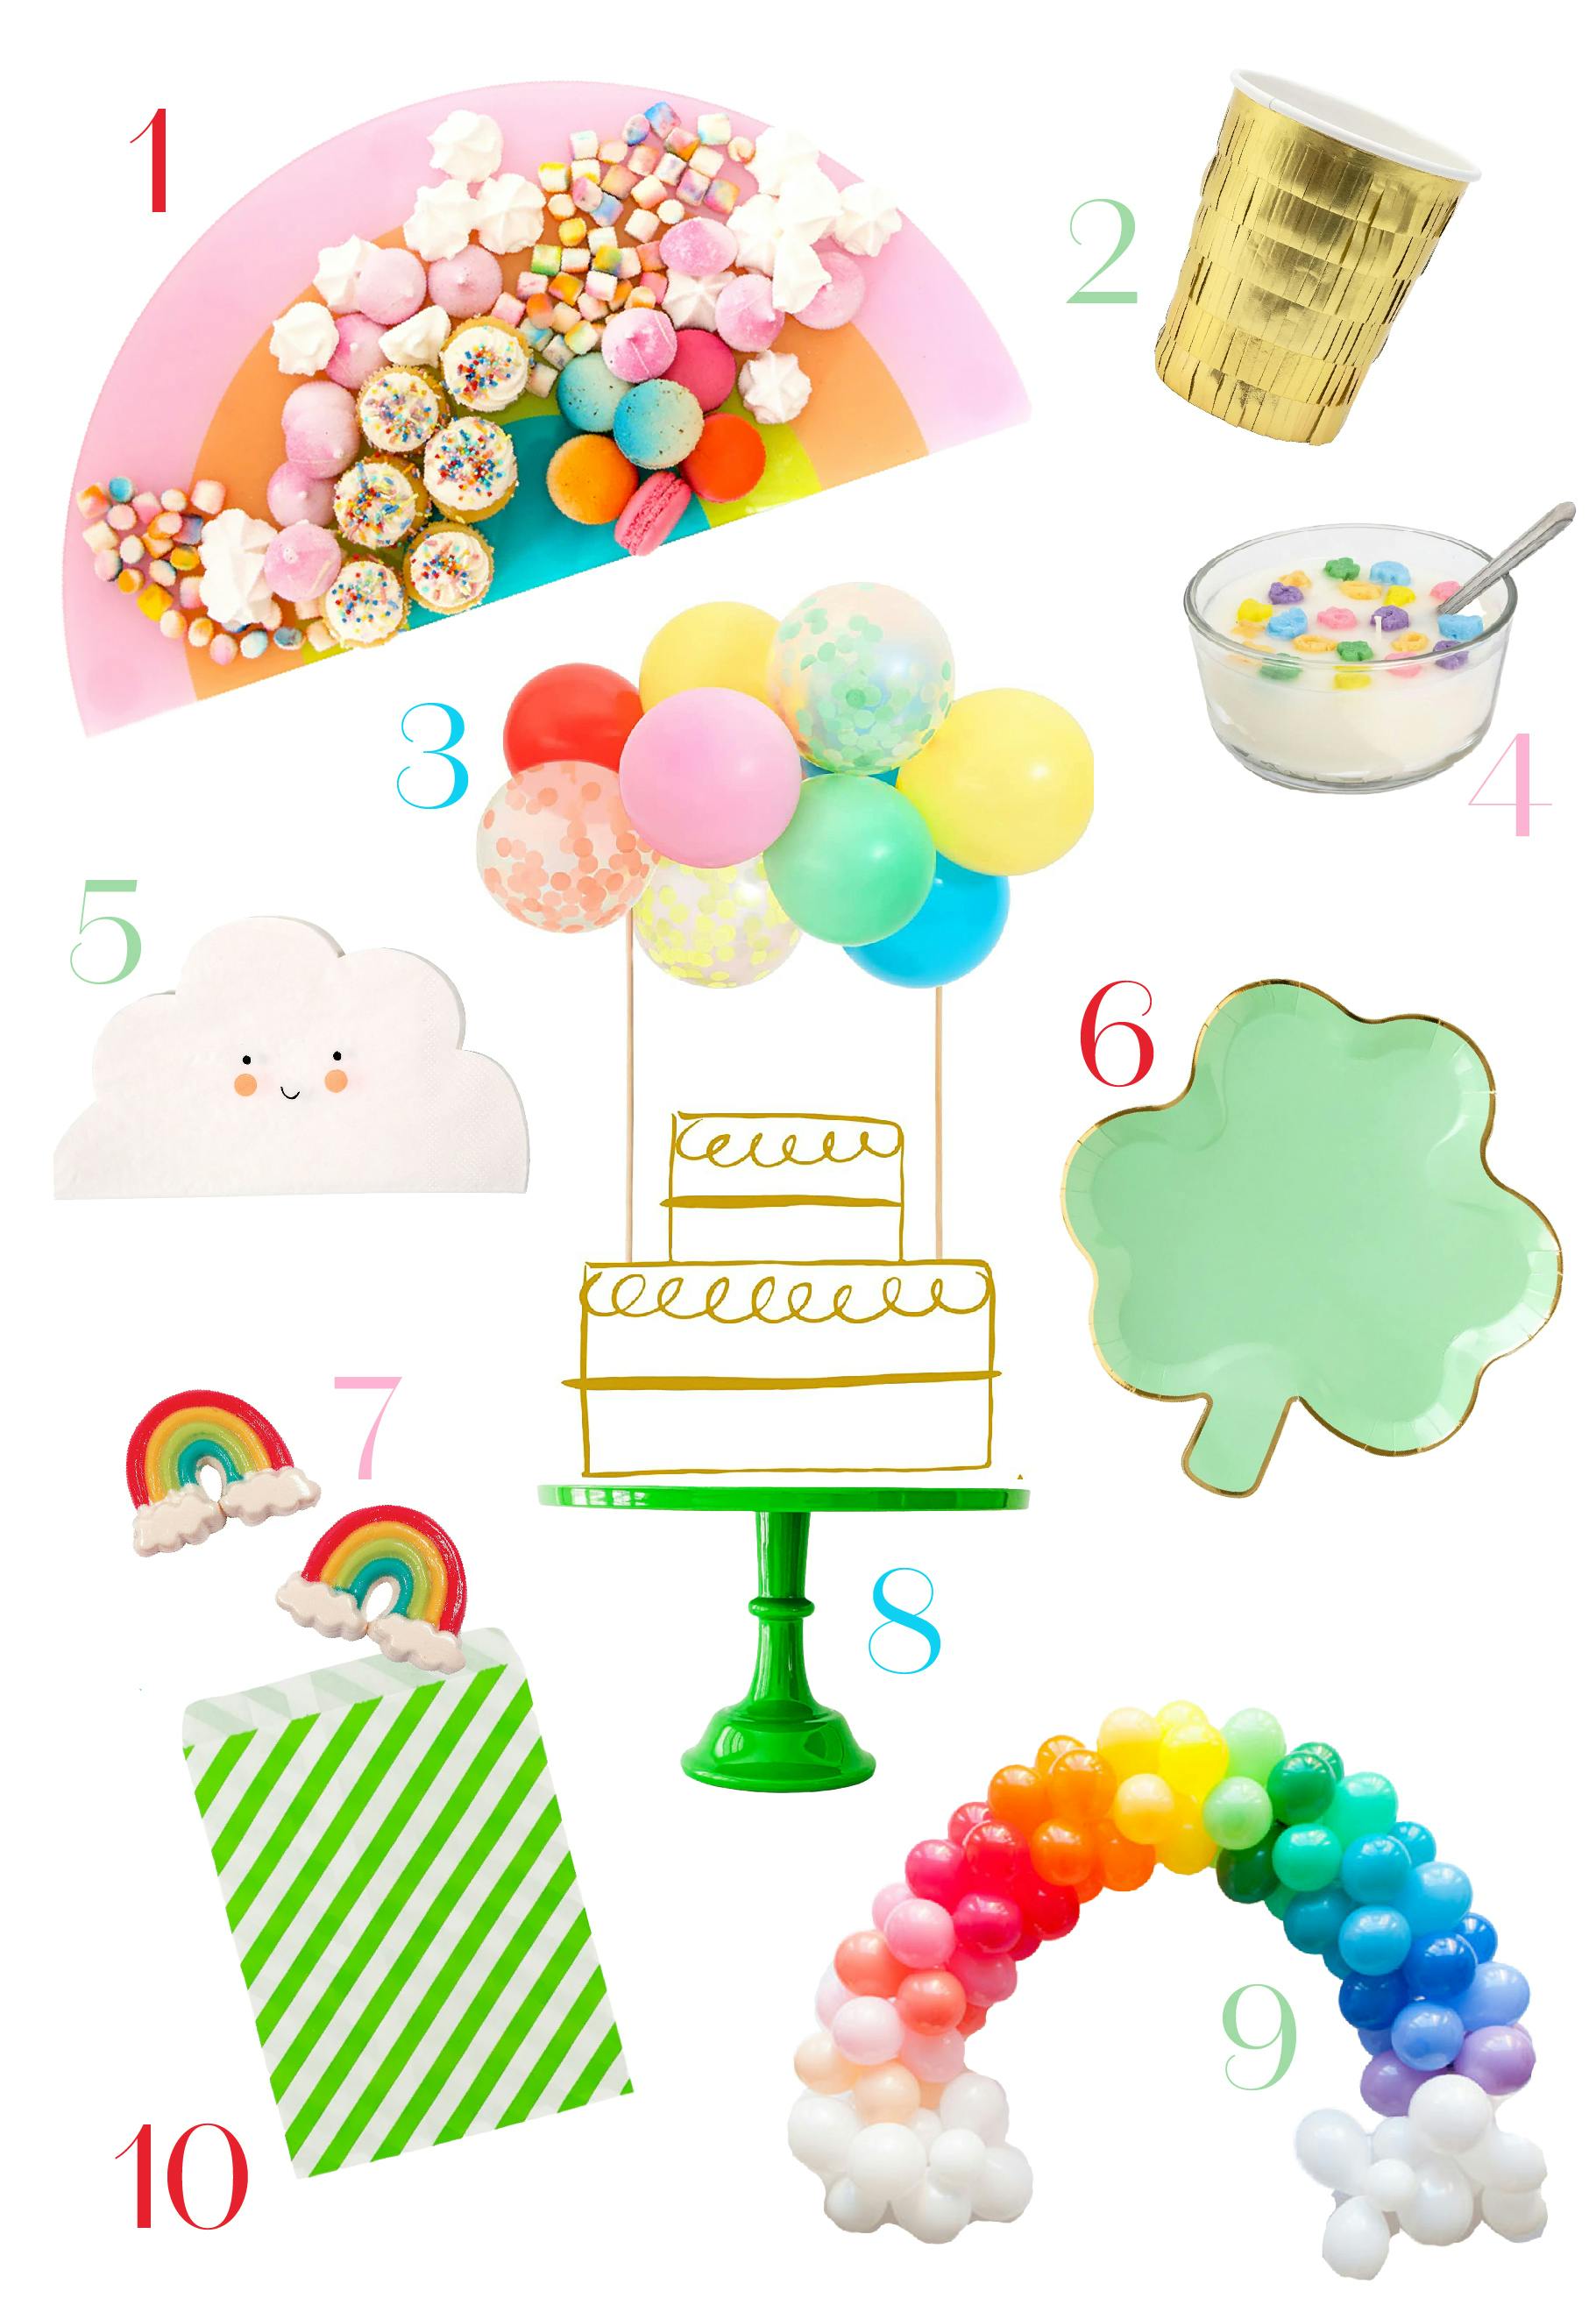 St. Patrick's Day Gift Guide for Hosting a Colorful Celebration